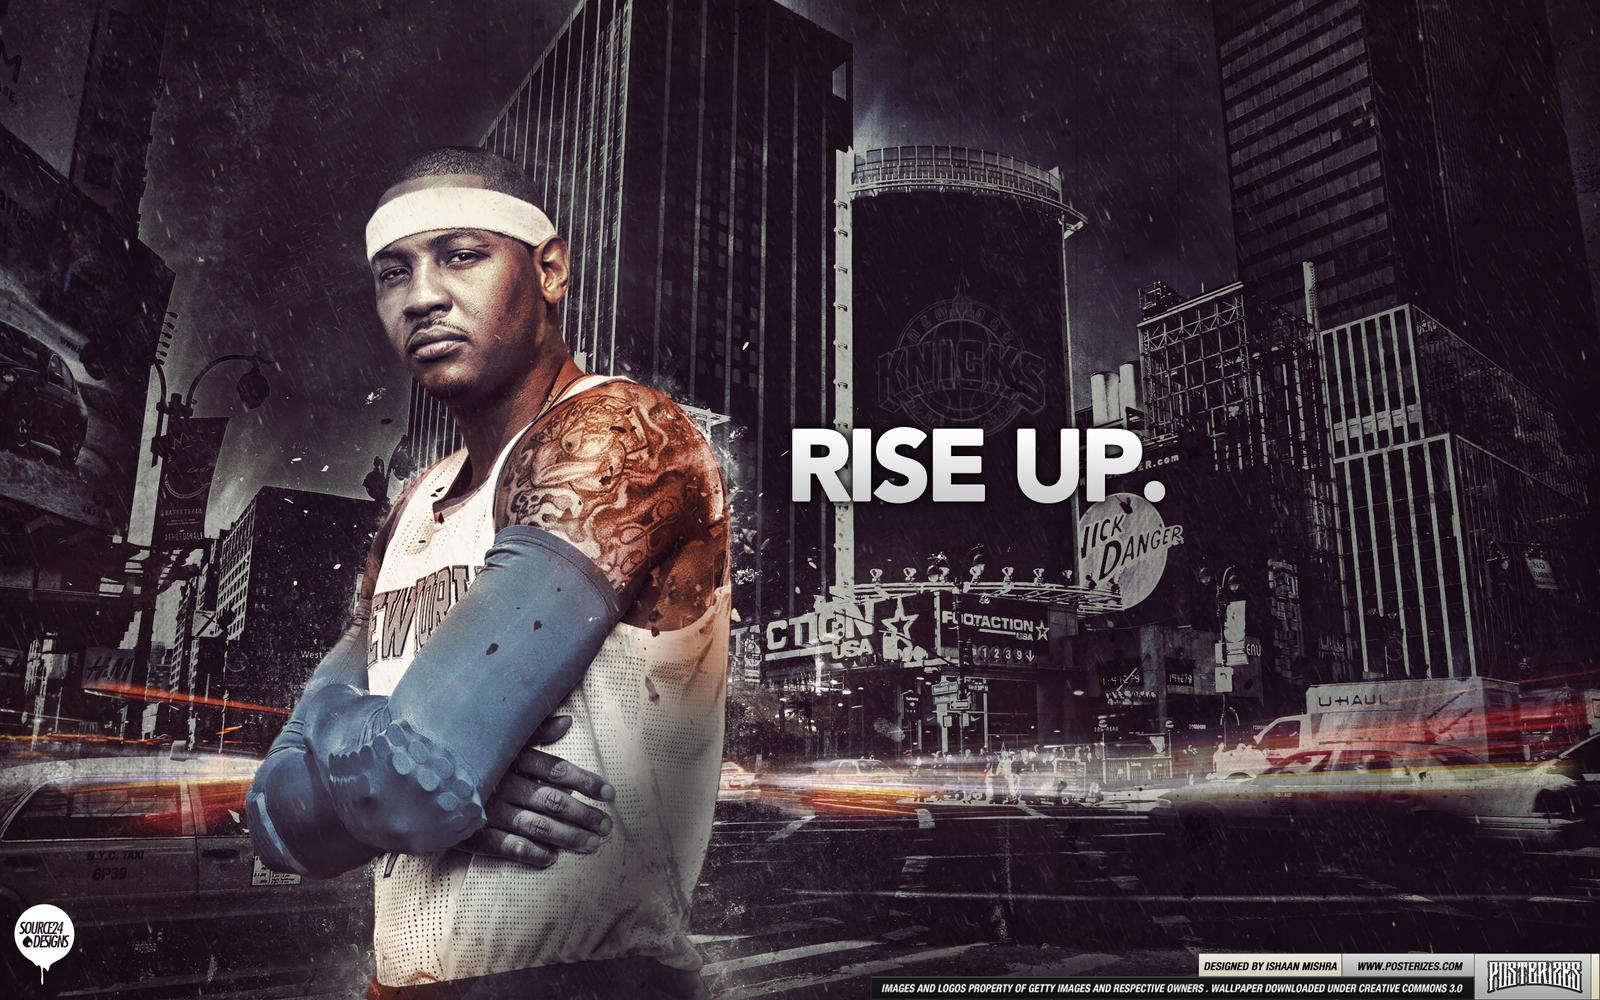 Download Carmelo Anthony New York Knicks Game Wallpaper